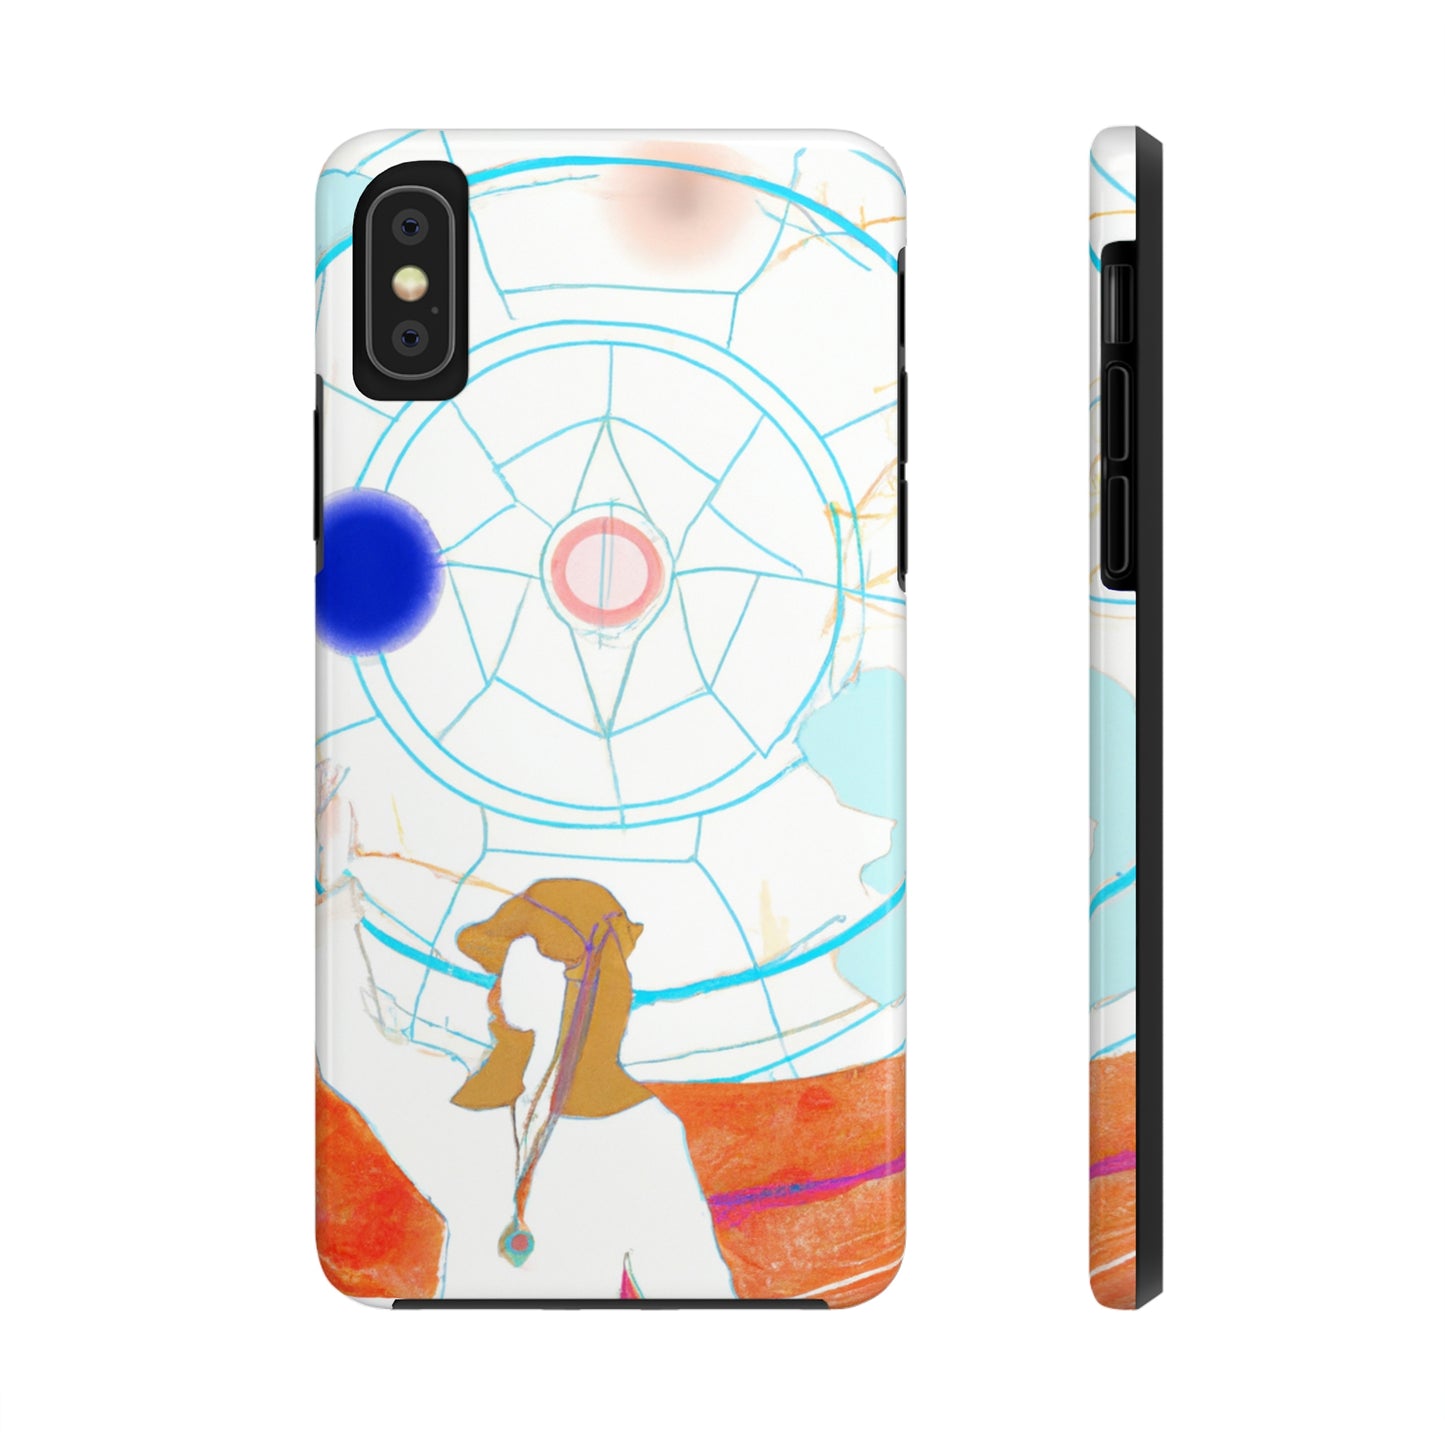 their school

The Secret Realm of High School - The Alien Tough Phone Cases